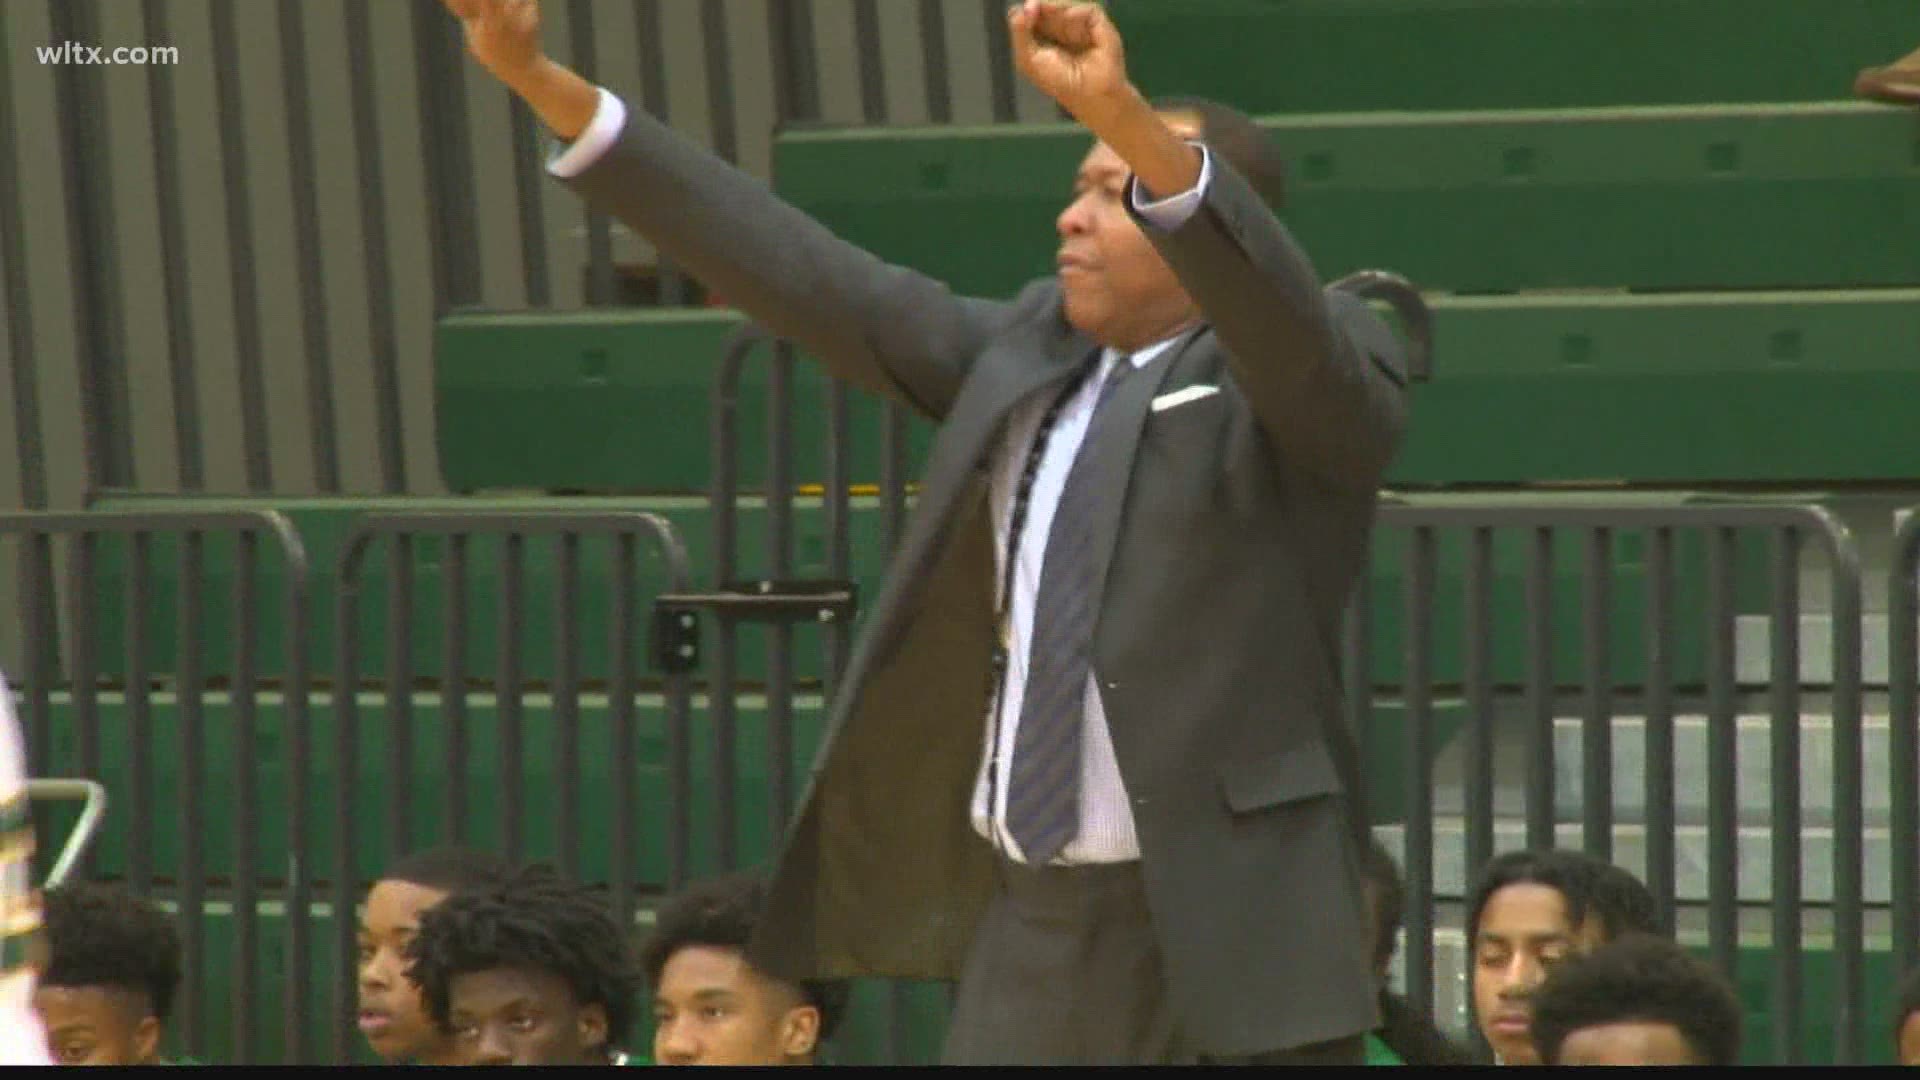 Perry Dozier, Sr, who played at South Carolina in the late 80s, is retiring after 15 seasons as the head basketball coach at Spring Valley.